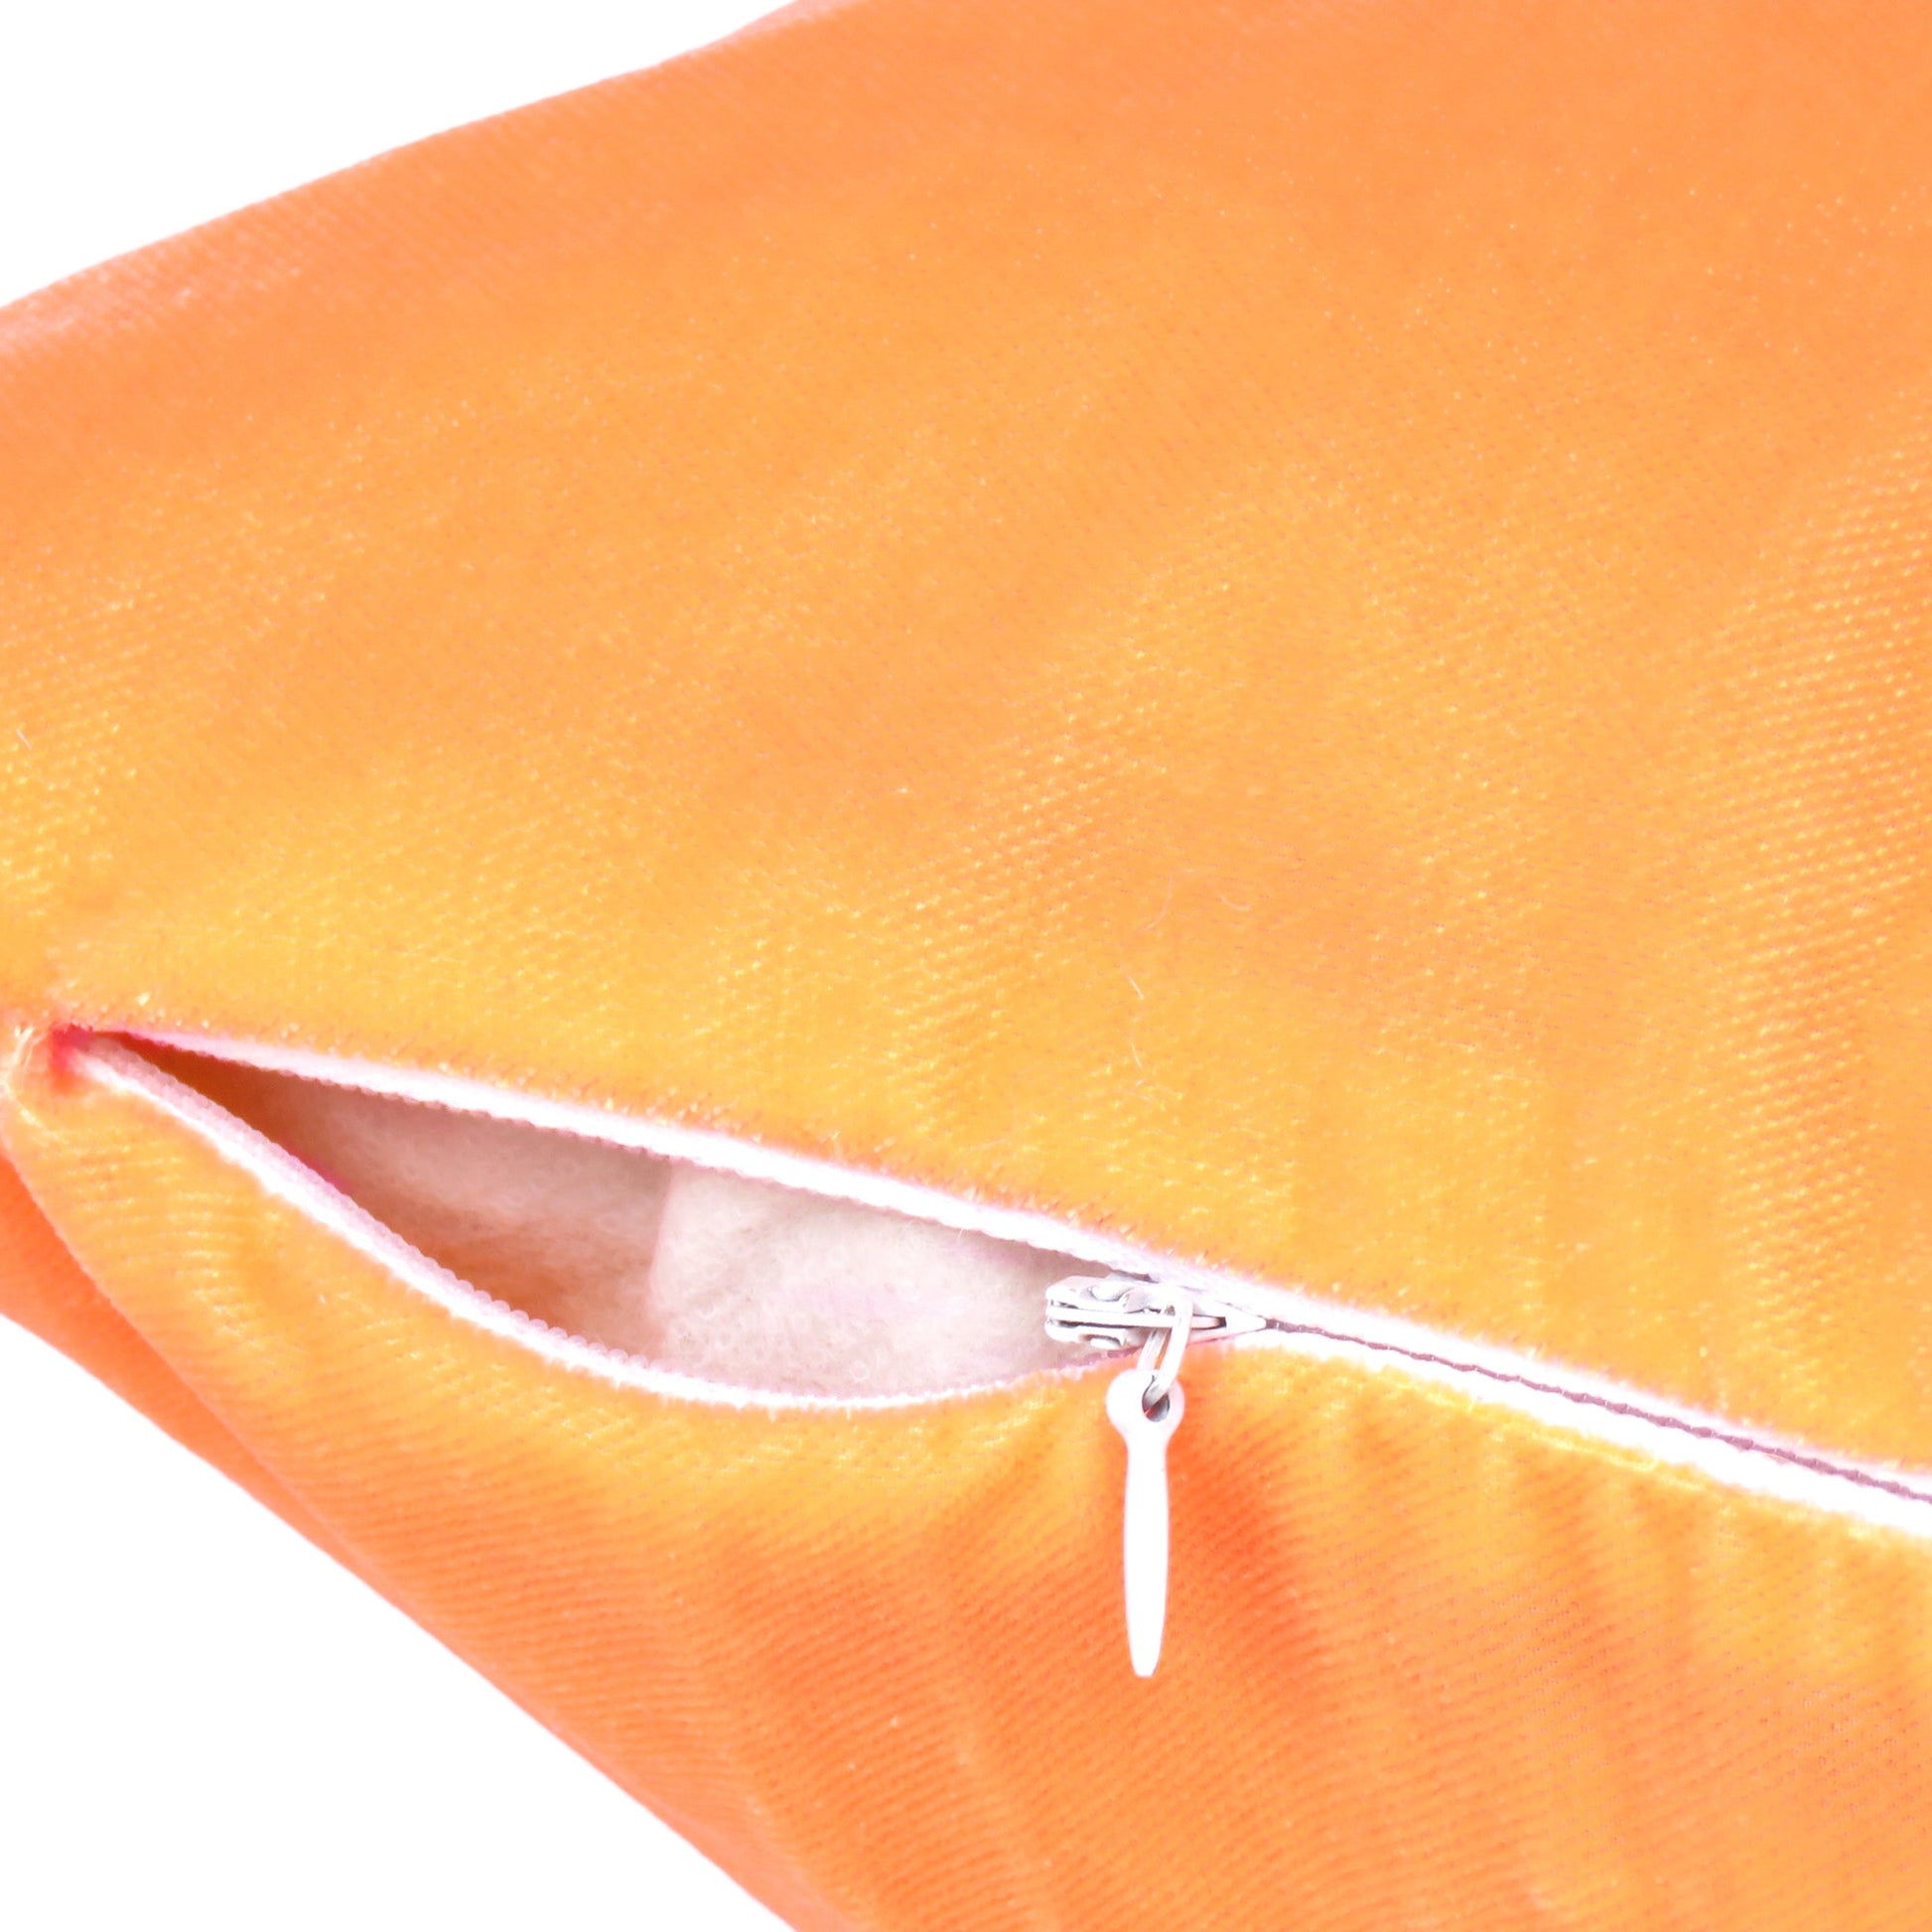 Solid Velvet Cushion Cover with Navy Blue Piping Edge in Set of 2 - Orange